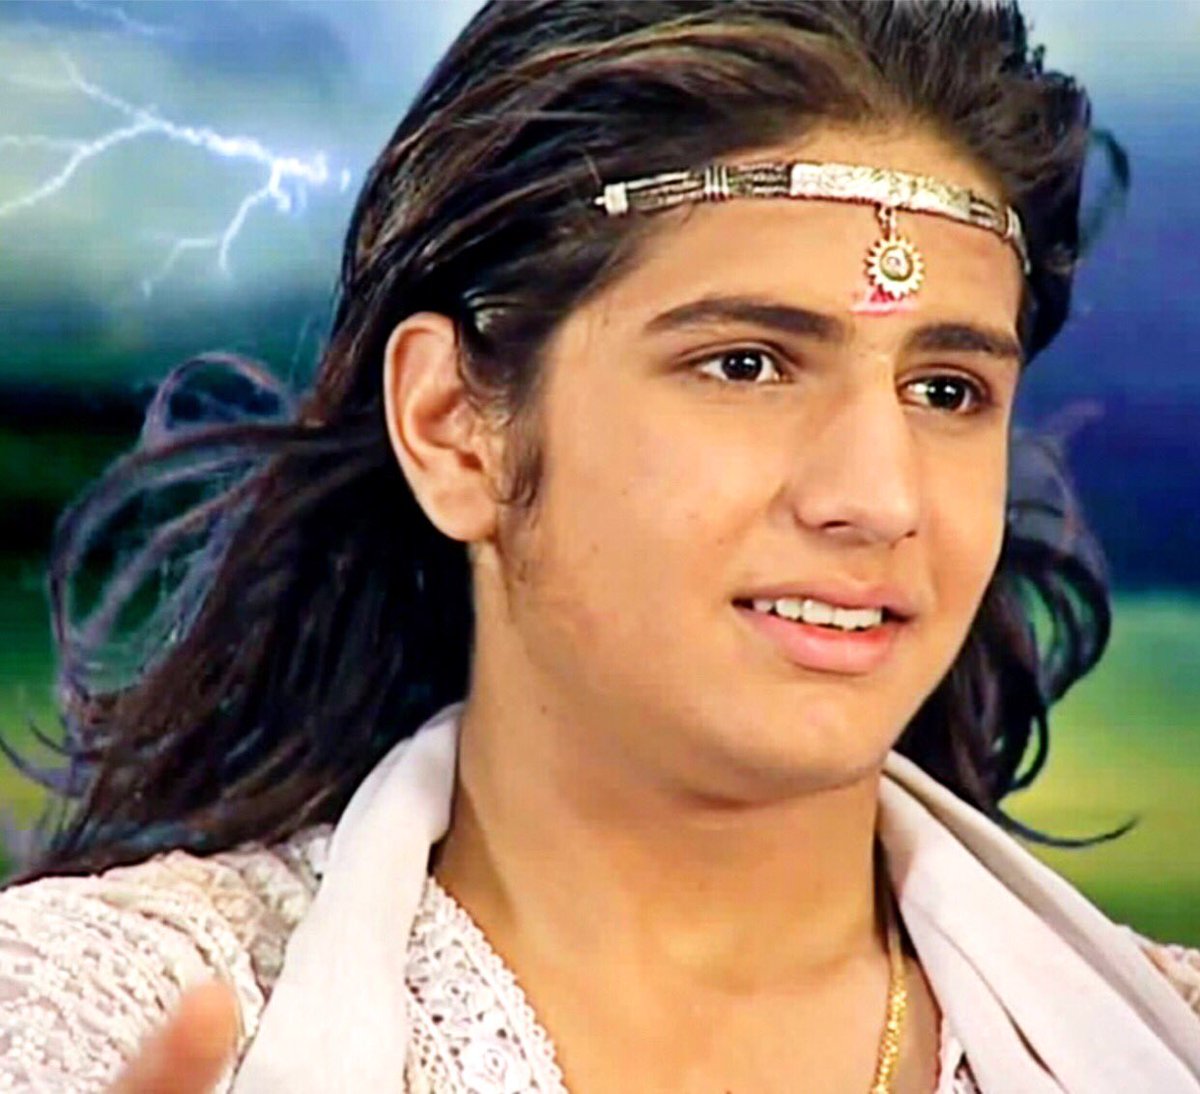 Team Rajat Tokas On Twitter Moment Of Life Throwback Memories Of Prithviraj Chauhan On Demand Falling In Love Over And Over Again With Cutest Rajjattokas Debonair Sexy Tokas At He made his 1 million dollar fortune with jodha the actor is currently single, his starsign is cancer and he is now 29 years of age. team rajat tokas on twitter moment of